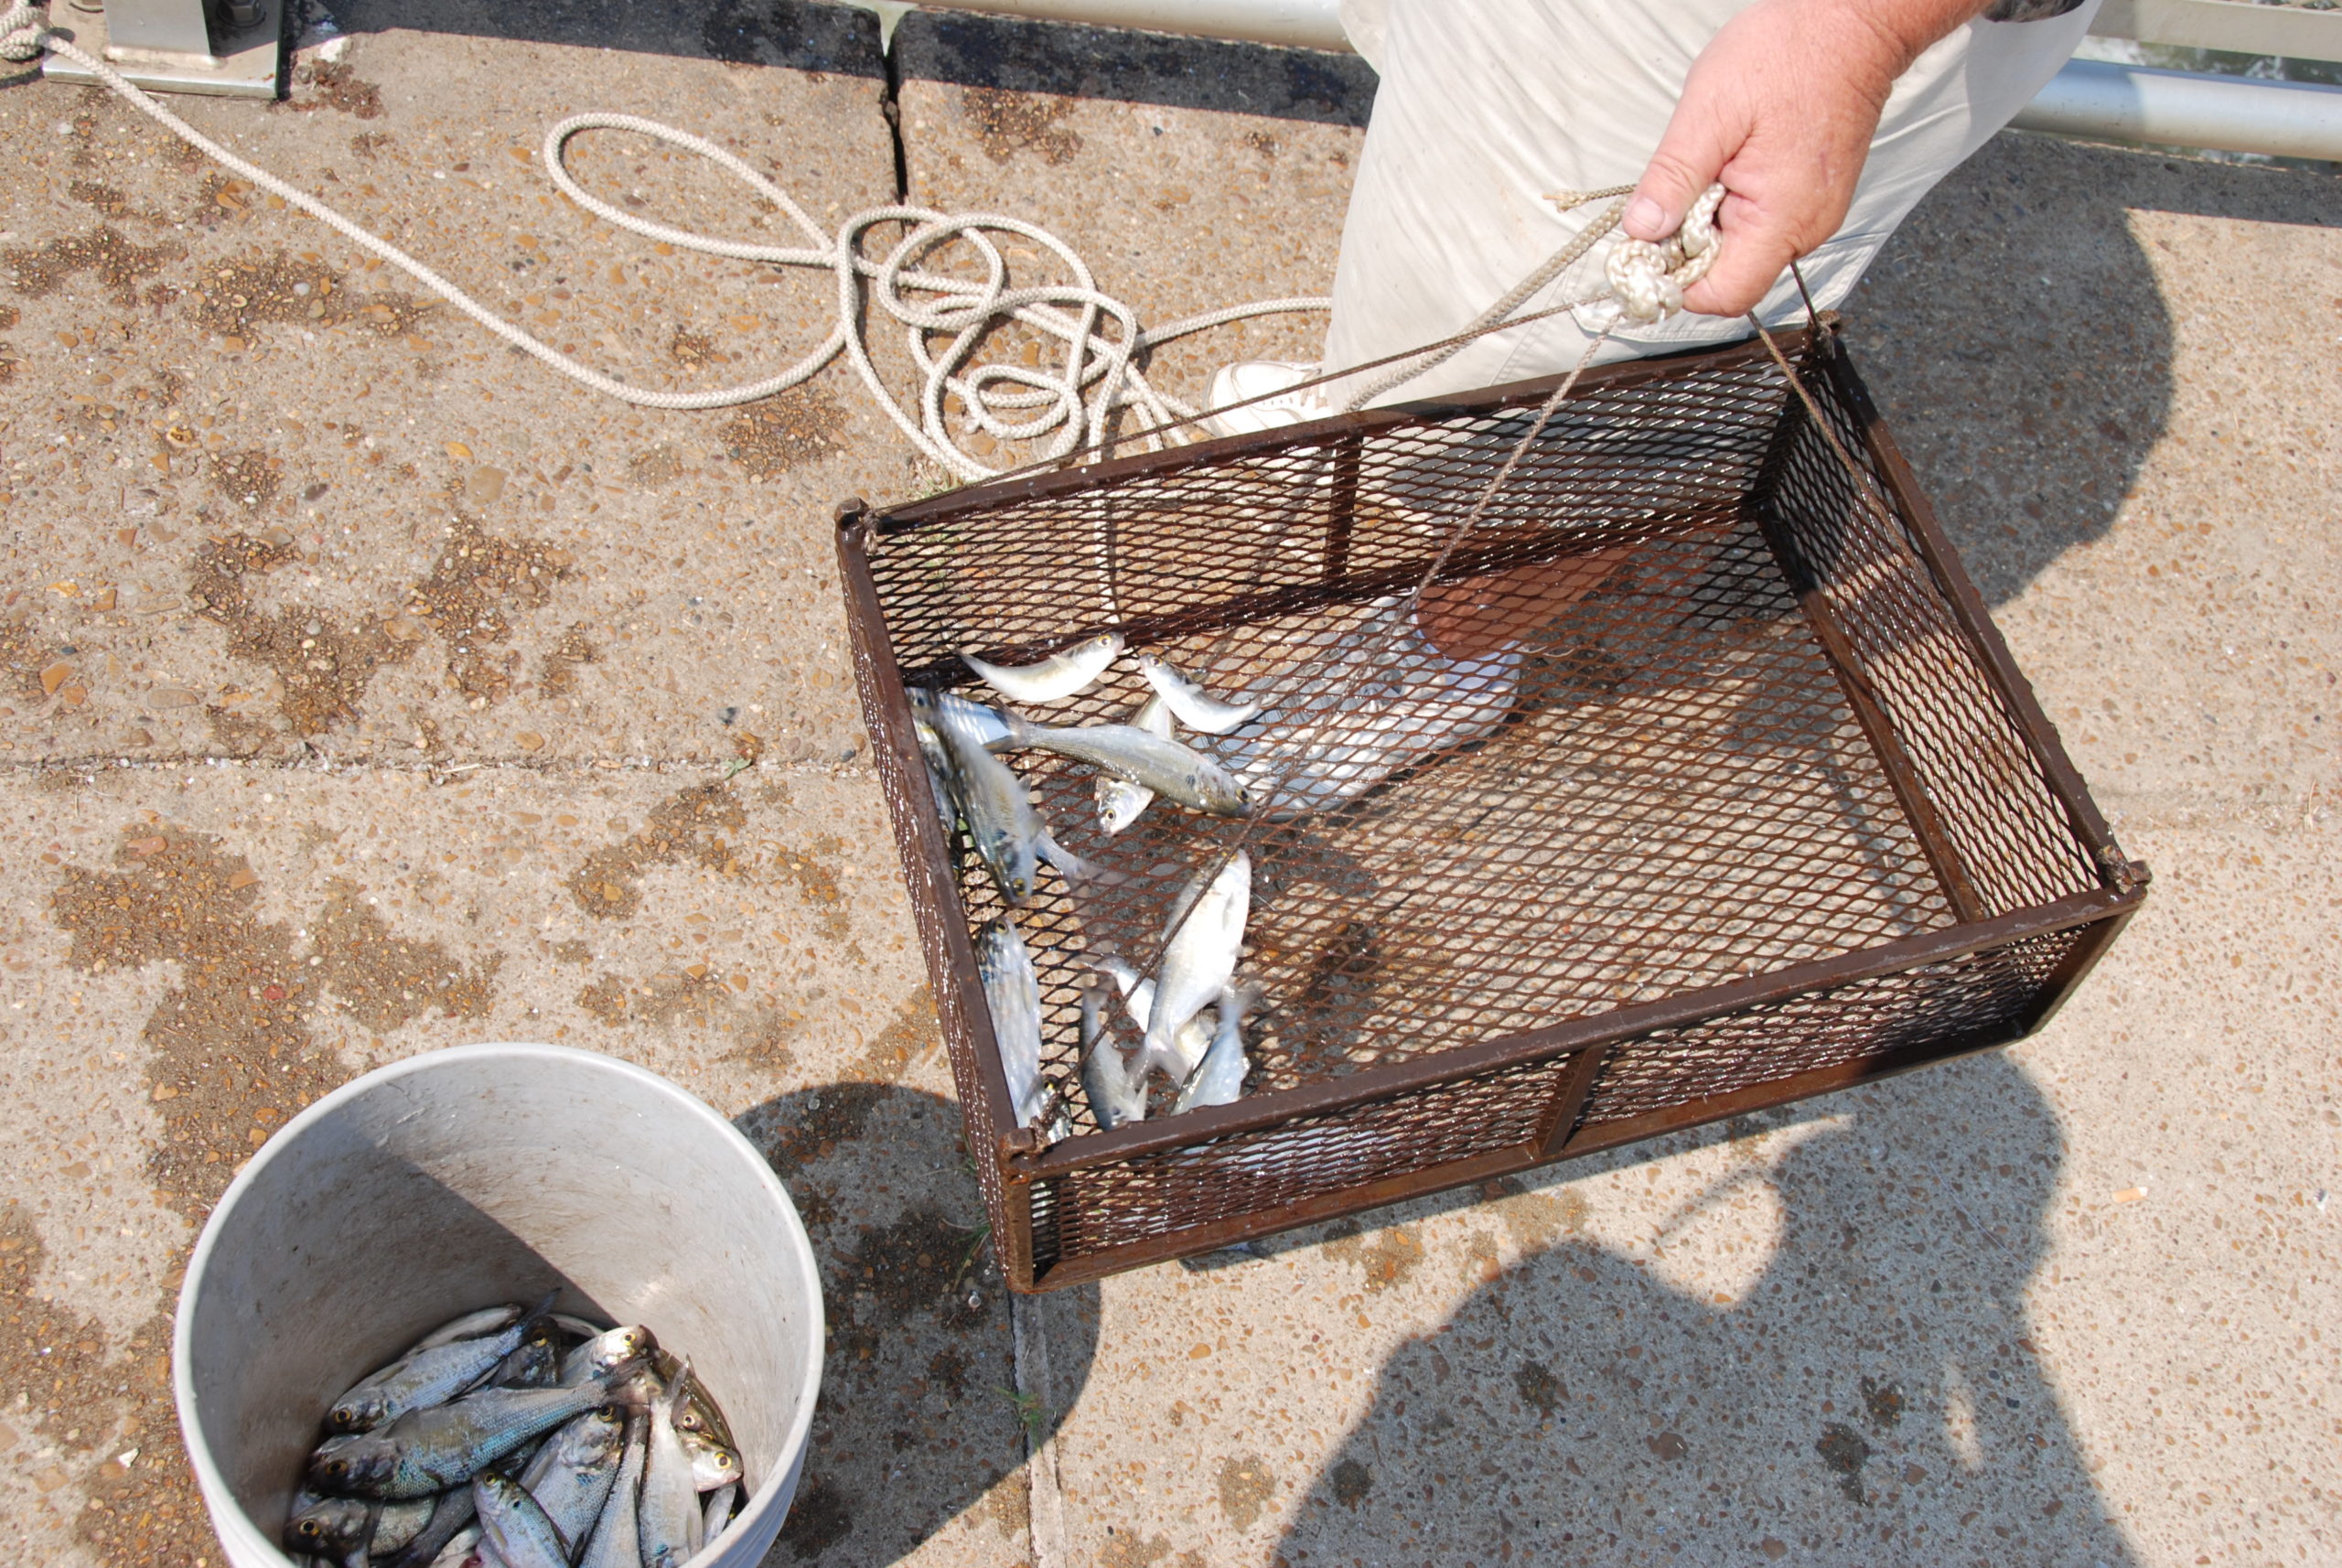 David Wall feels it's a waste of time to fish for catfish at Grenada Lake  without shad for bait. He catches plenty using a metal basket lowered into  the tailrace water below